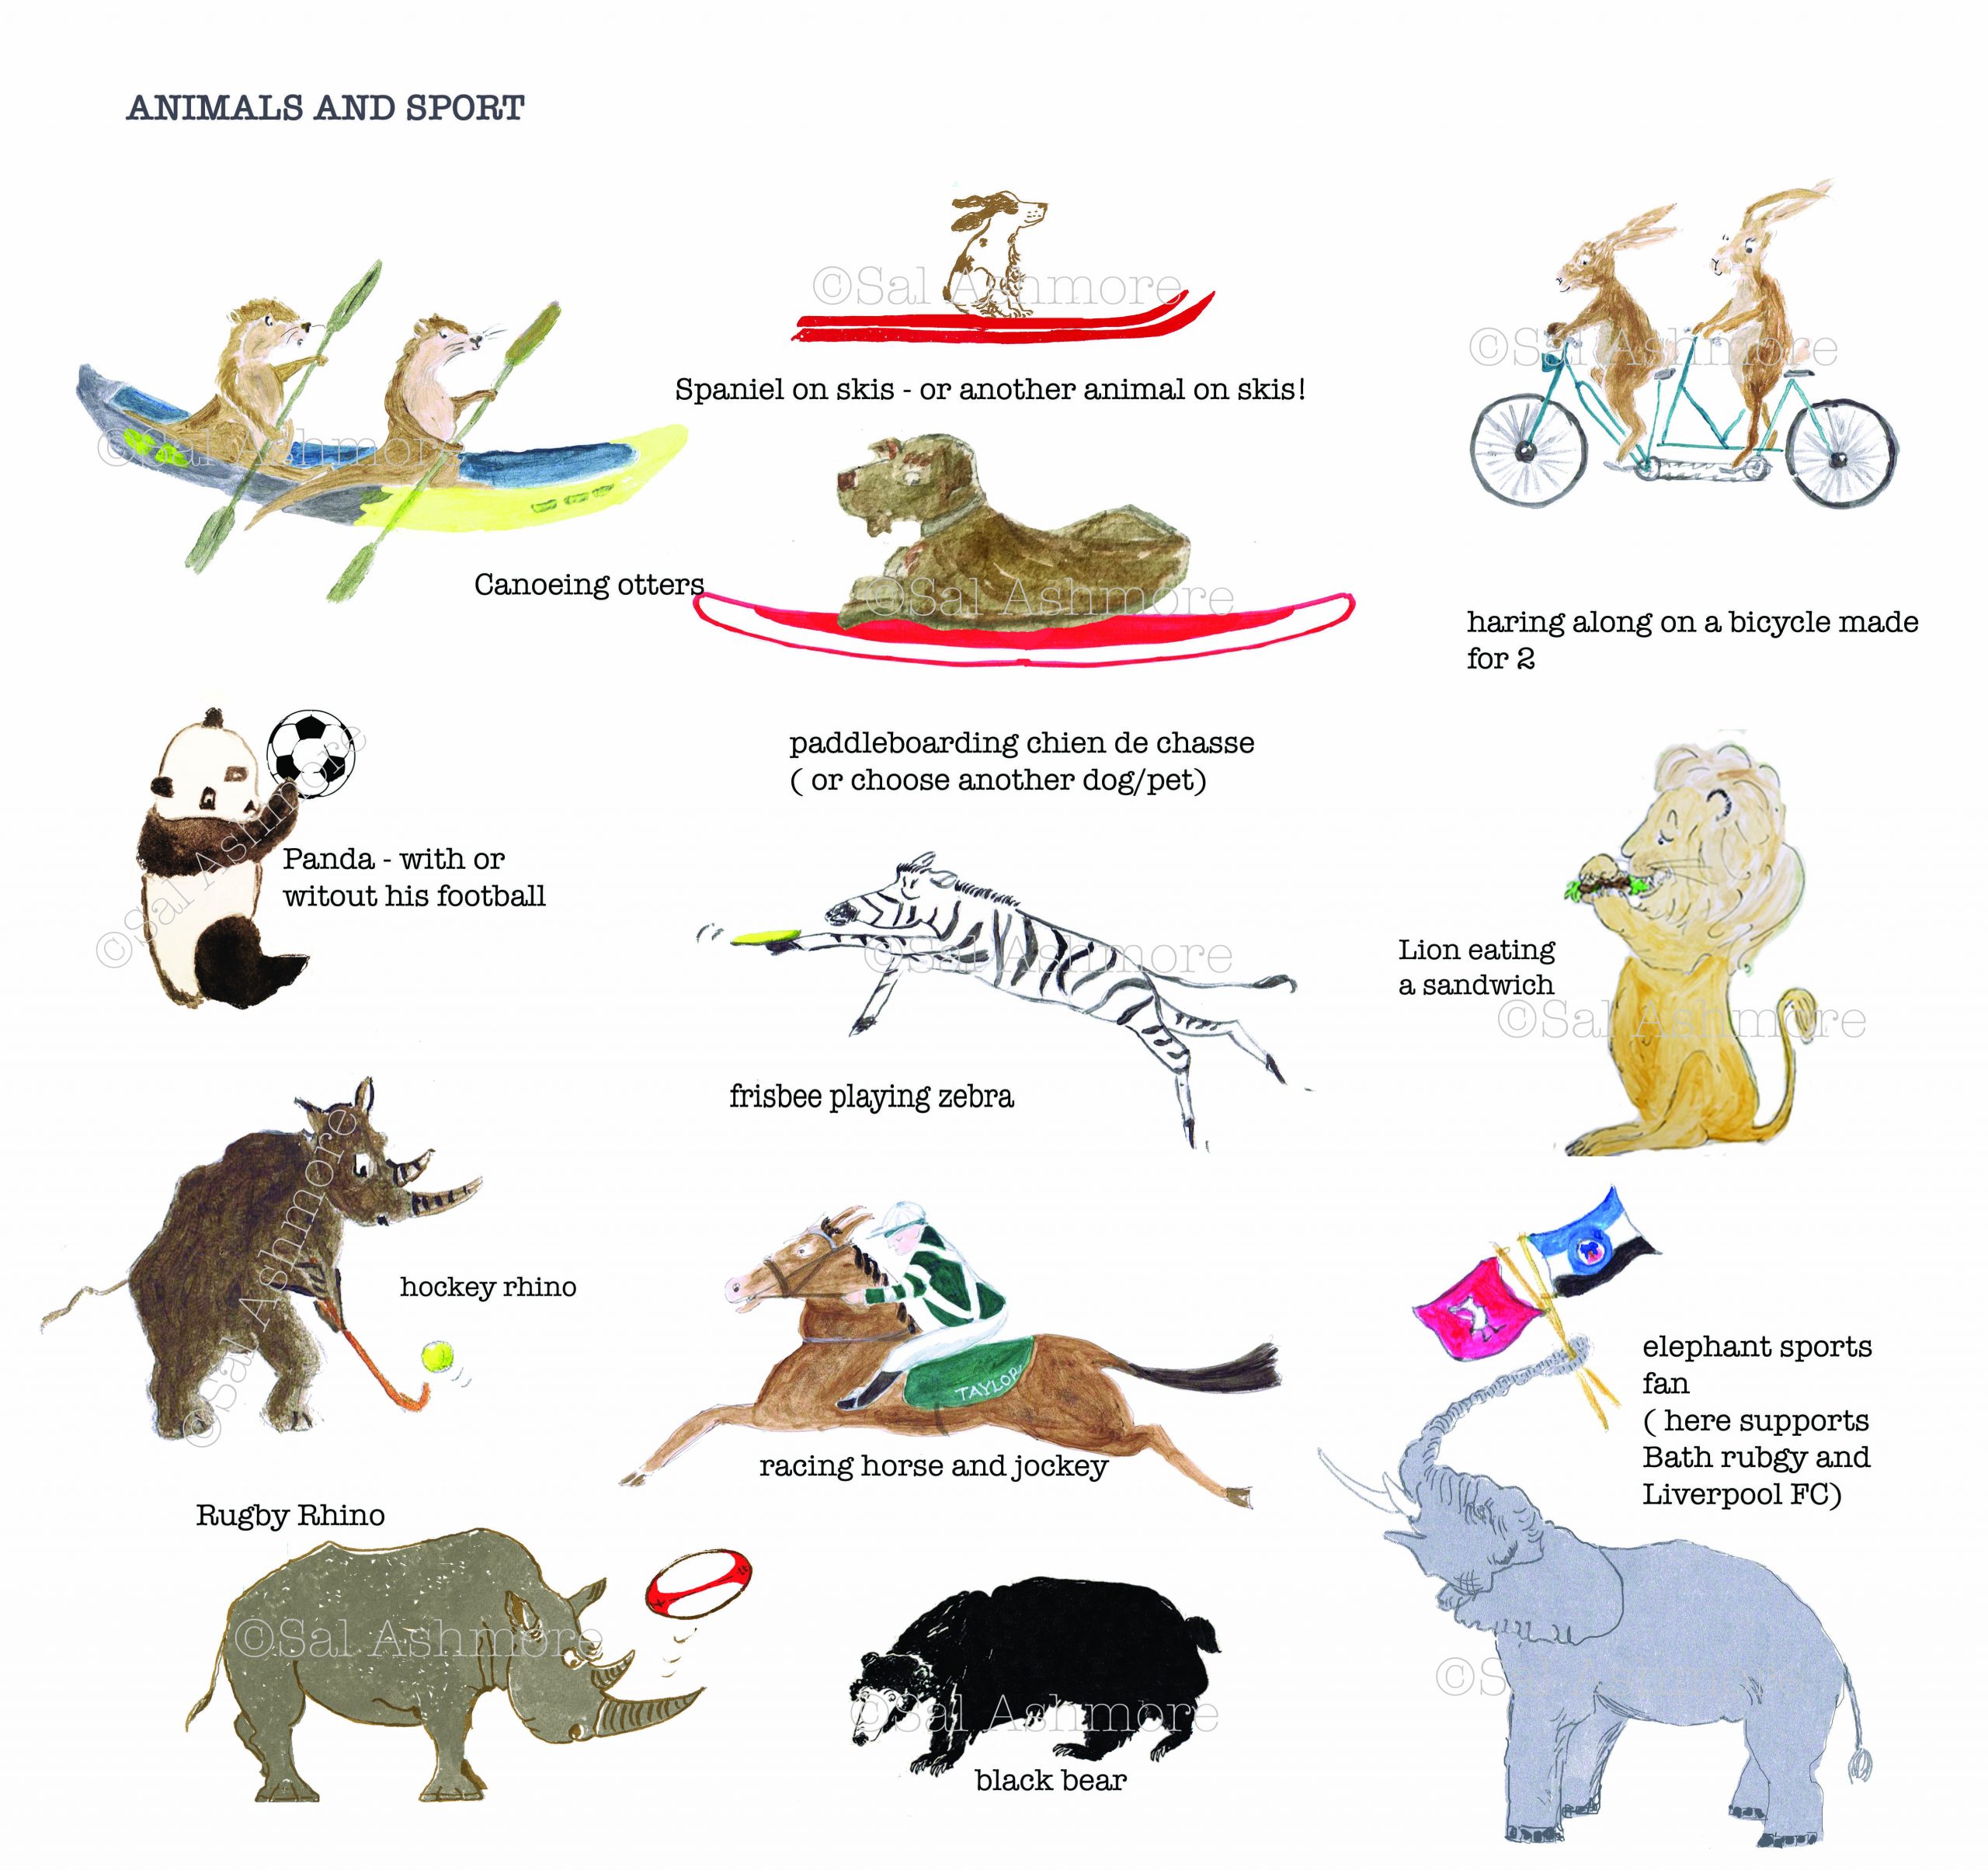 this page is a storyboard which is where customers visit to choose my hand drawn illustrations for their personalised prints. This story board features animals, and animals doing sport! So there is a rugby rhino, a frisbee playing zebra, 2 hares on a bicycle, canoeing otters, a race horse and jockey, a hockey playing rhino, etc.